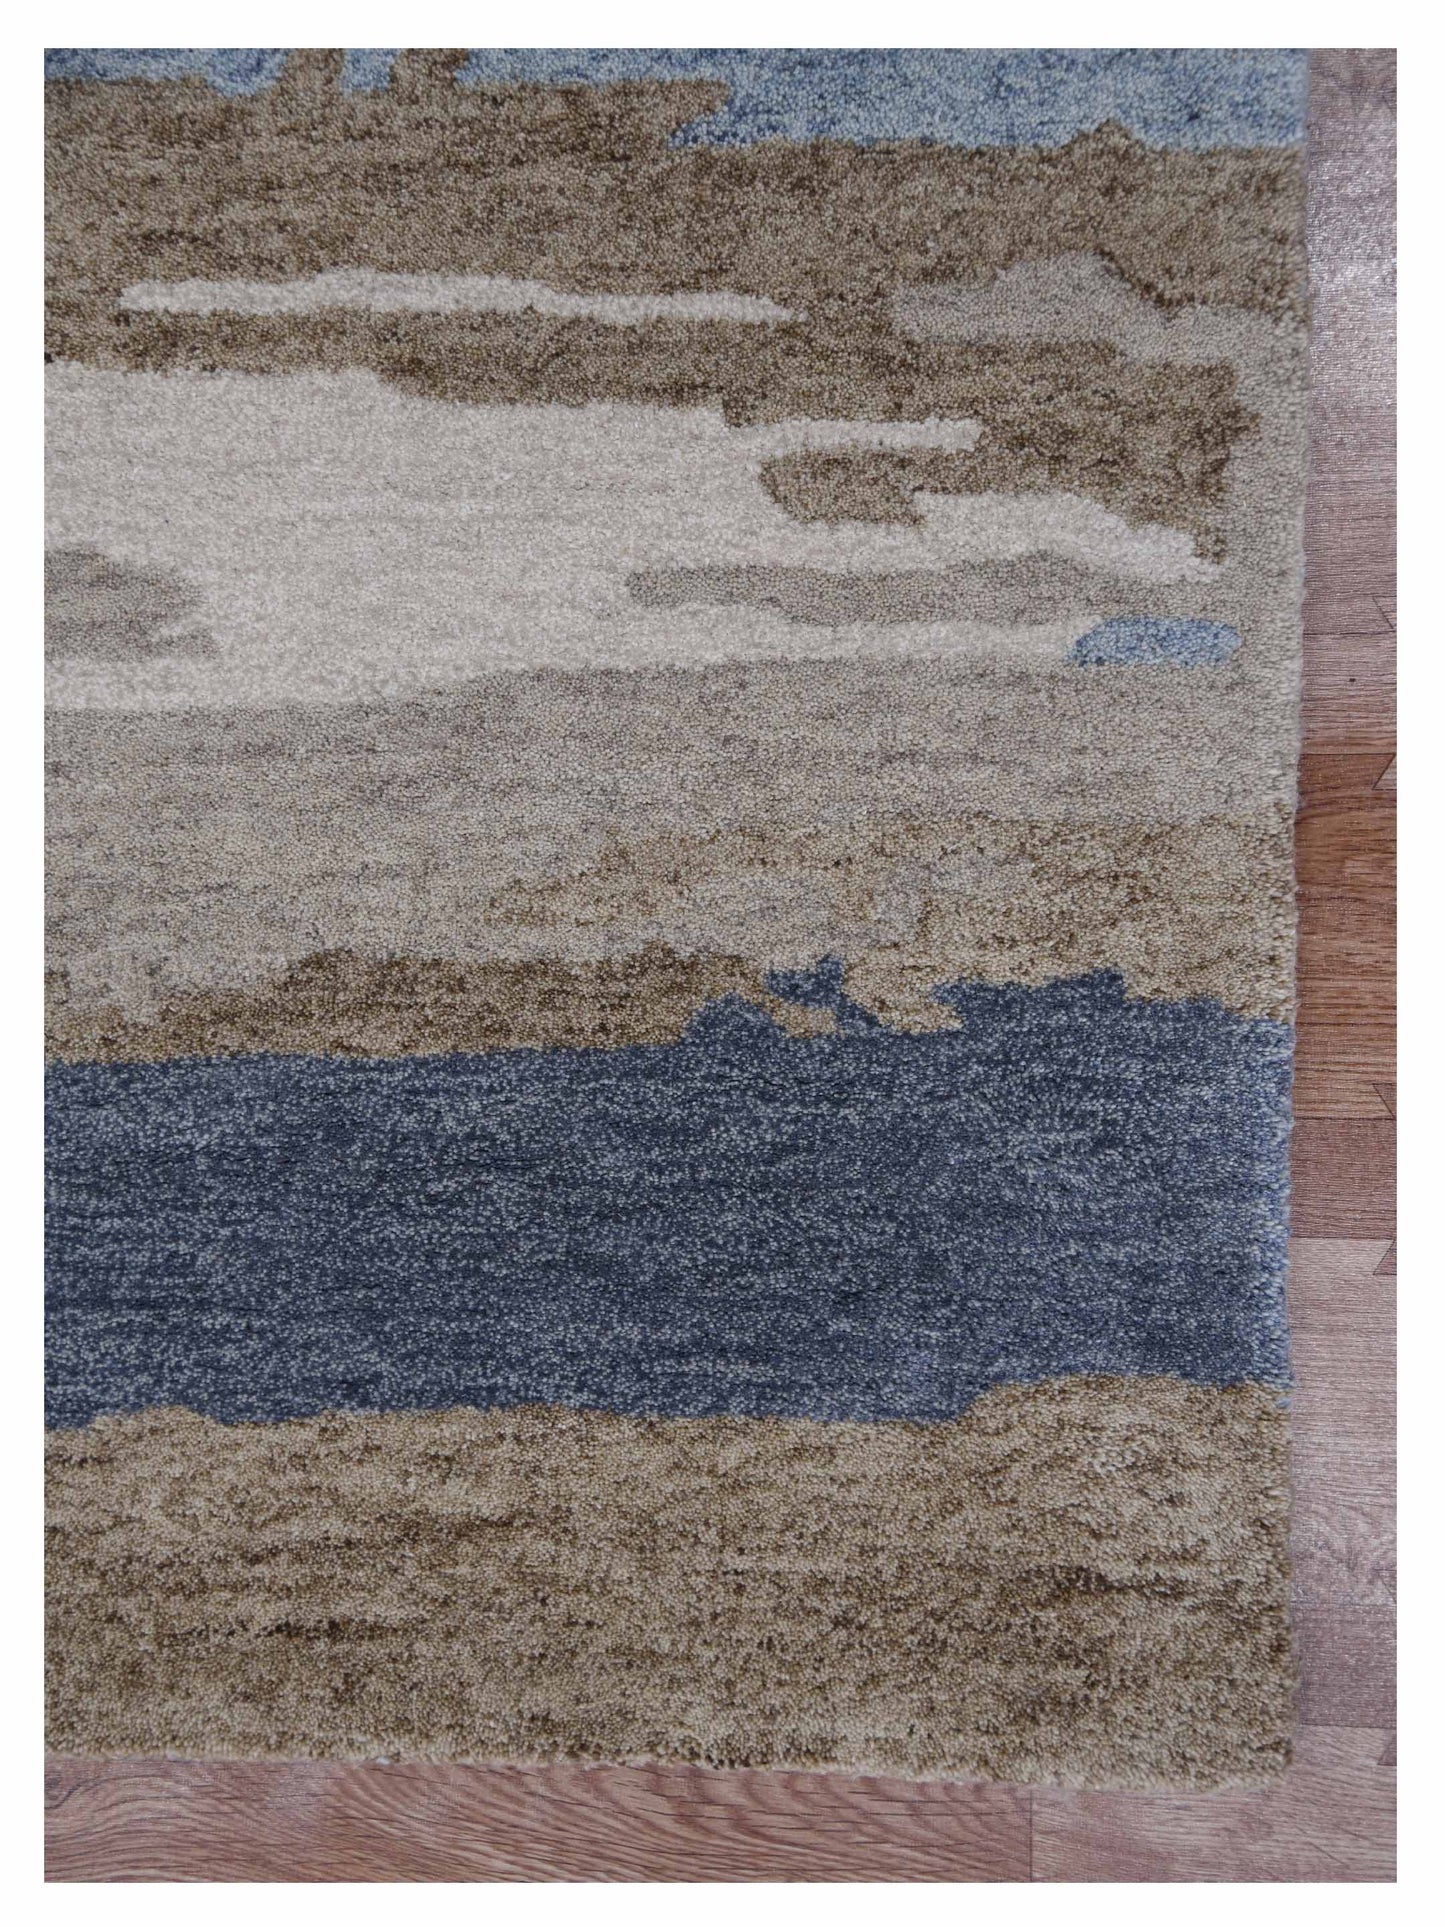 Limited ADELAIDE AD-105 WATER BLUE  Transitional Tufted Rug